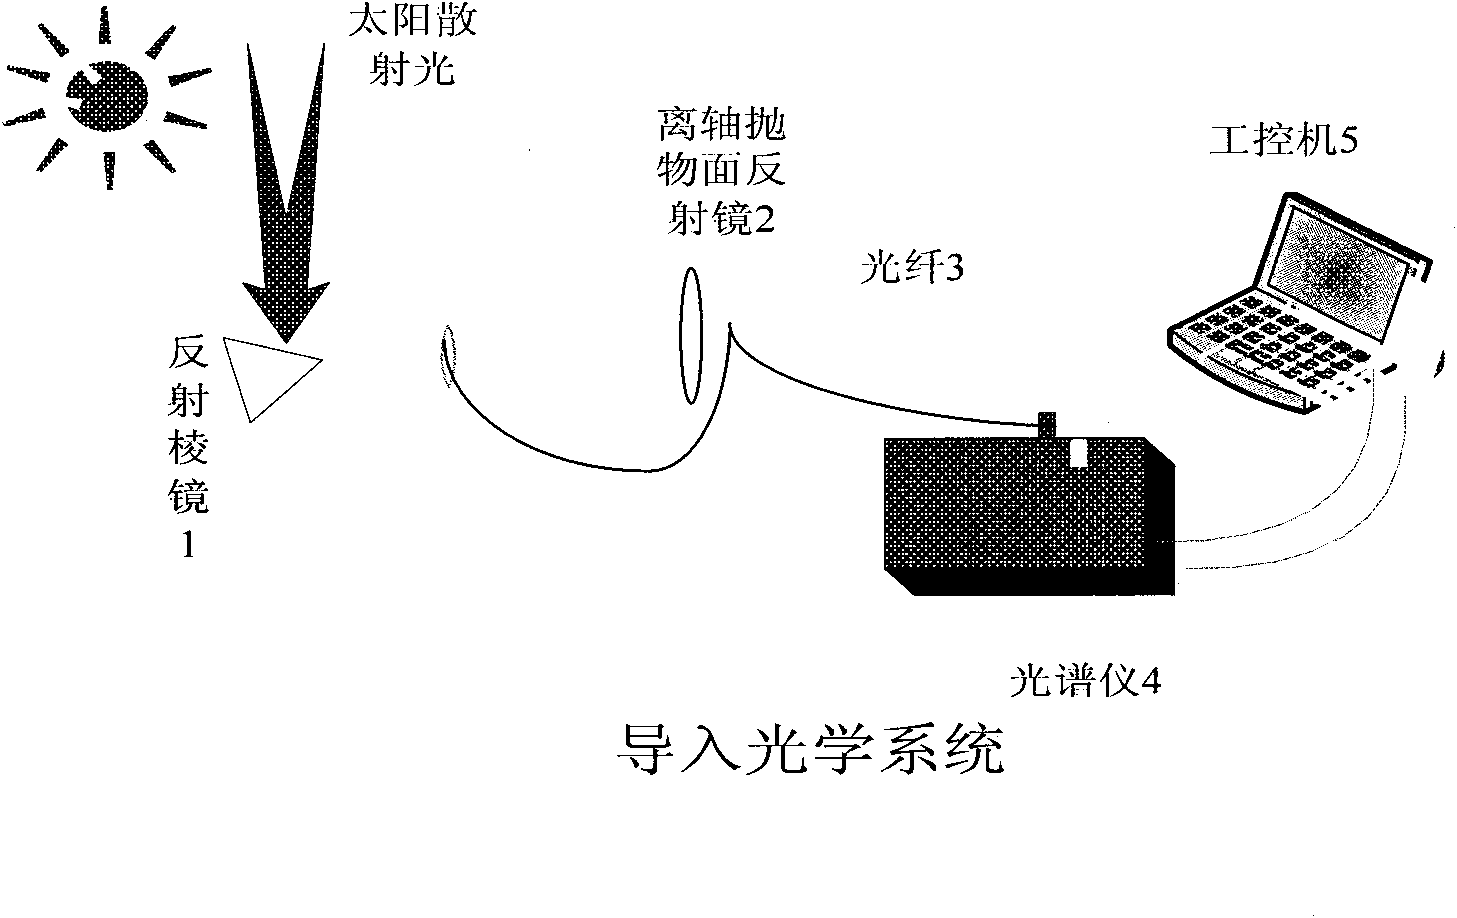 Off-axis reflection-based import optical system